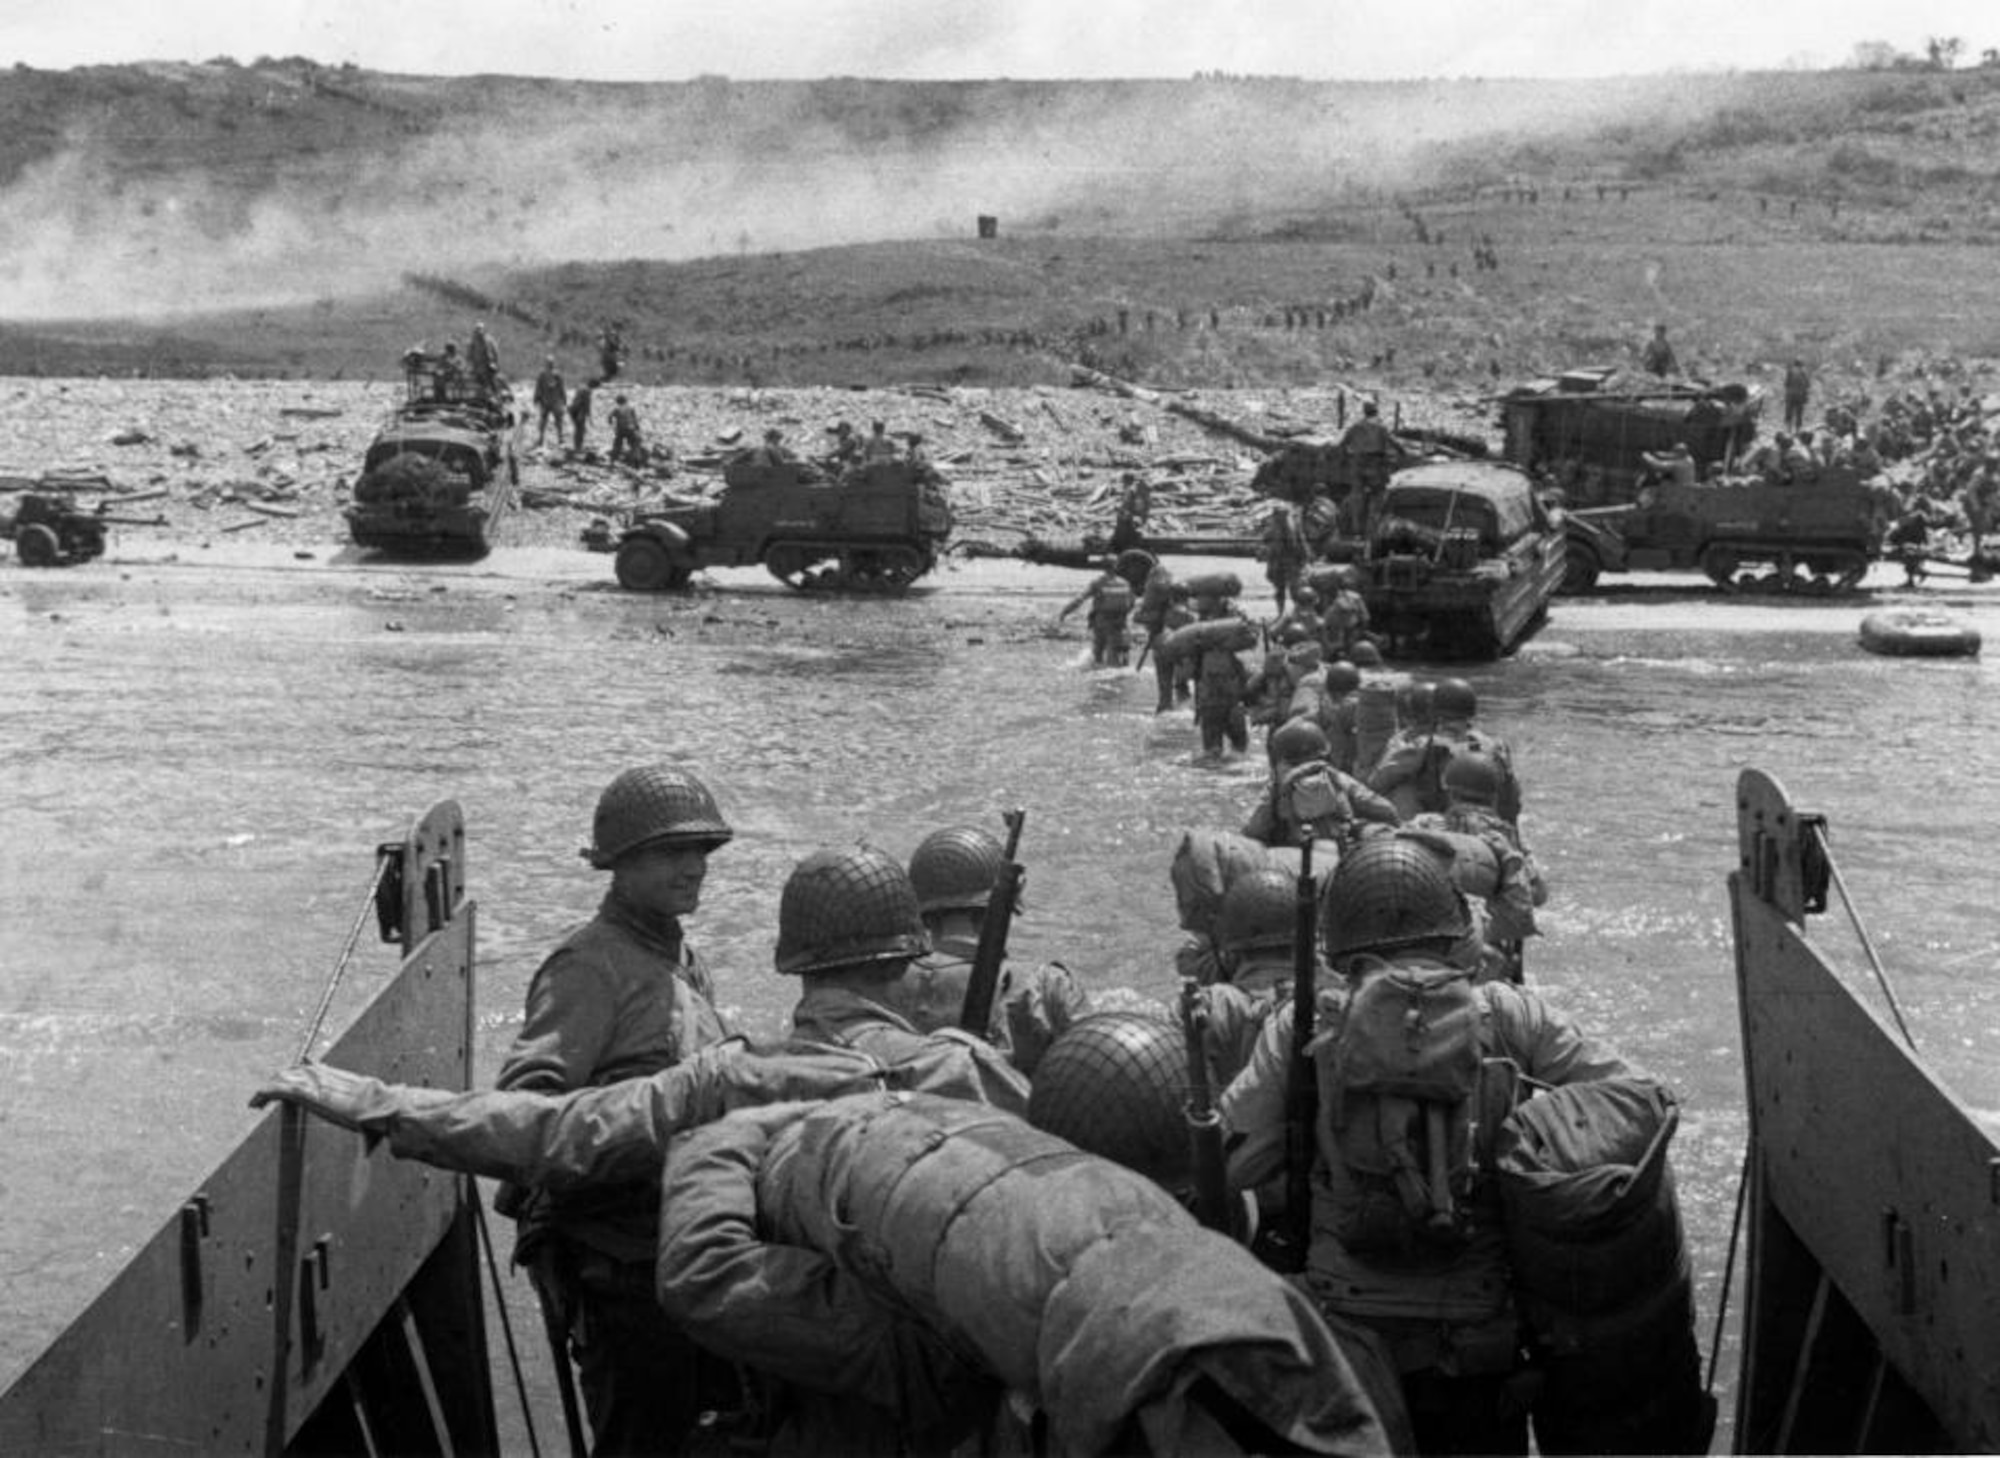 British troops come ashore at Jig Green sector, Gold Beach